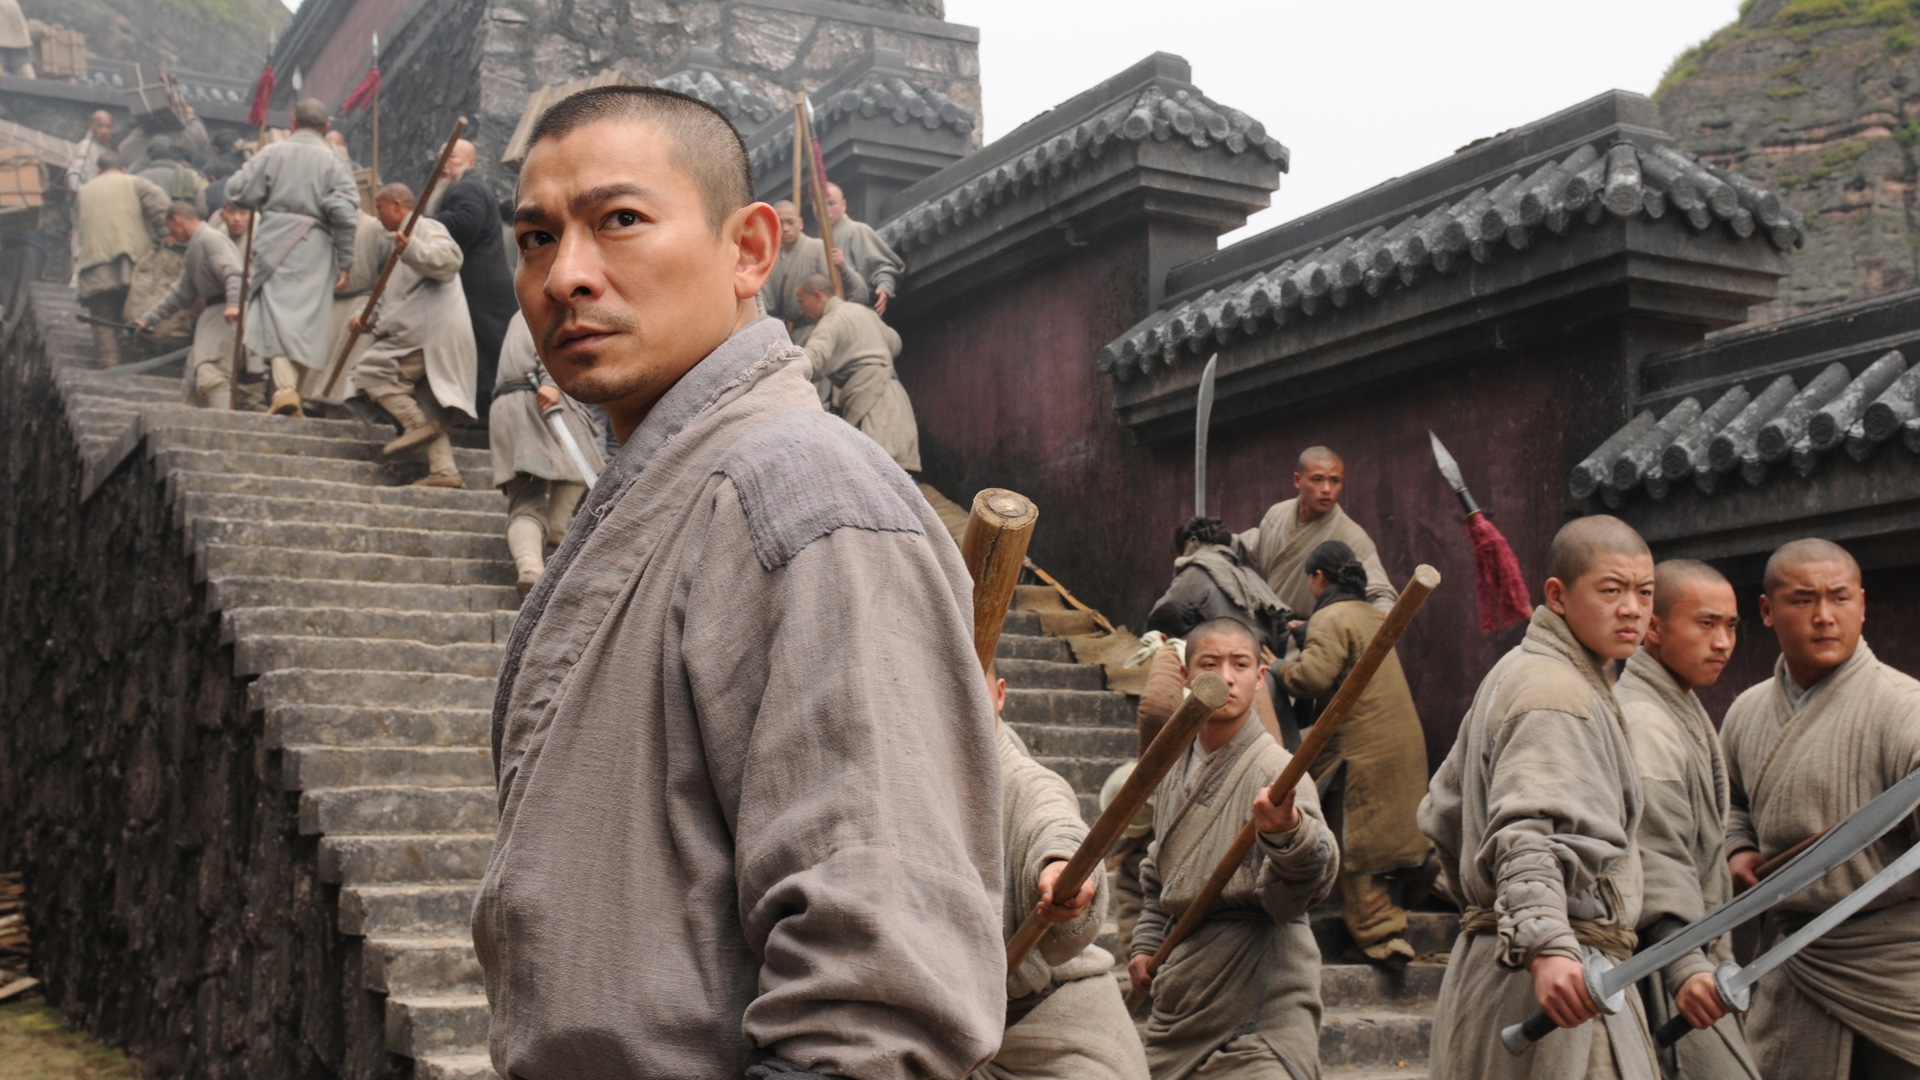 10 Brothers of Shaolin - Watch Free on Pluto TV United States